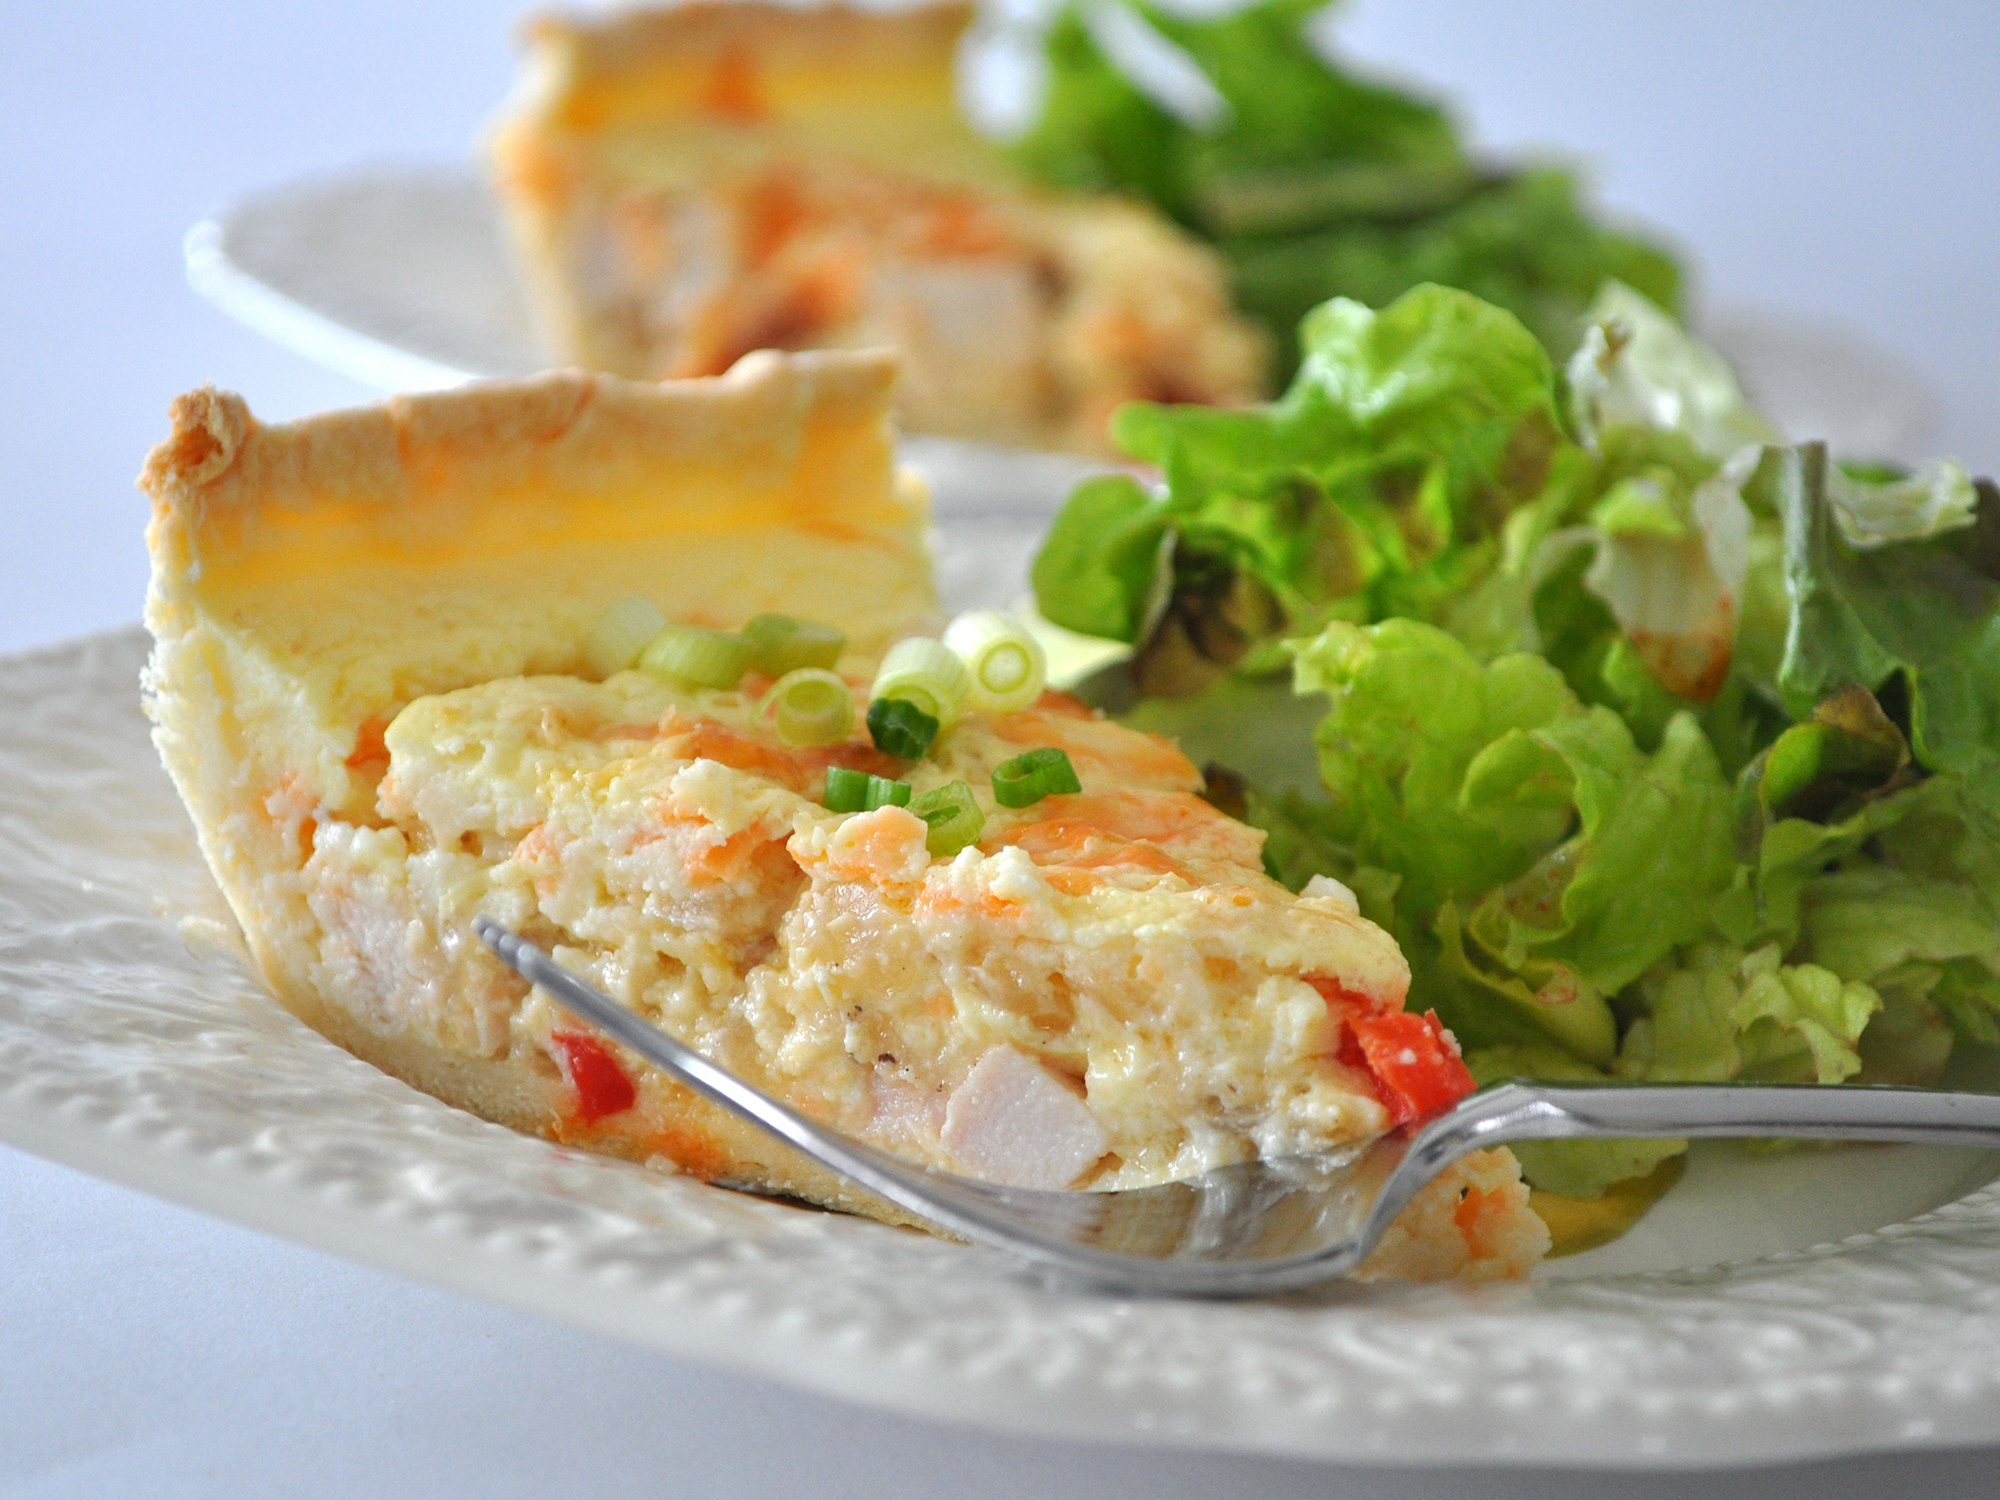 close up view of a slice of Sour Cream Chicken Quiche on plates with salad and a forks